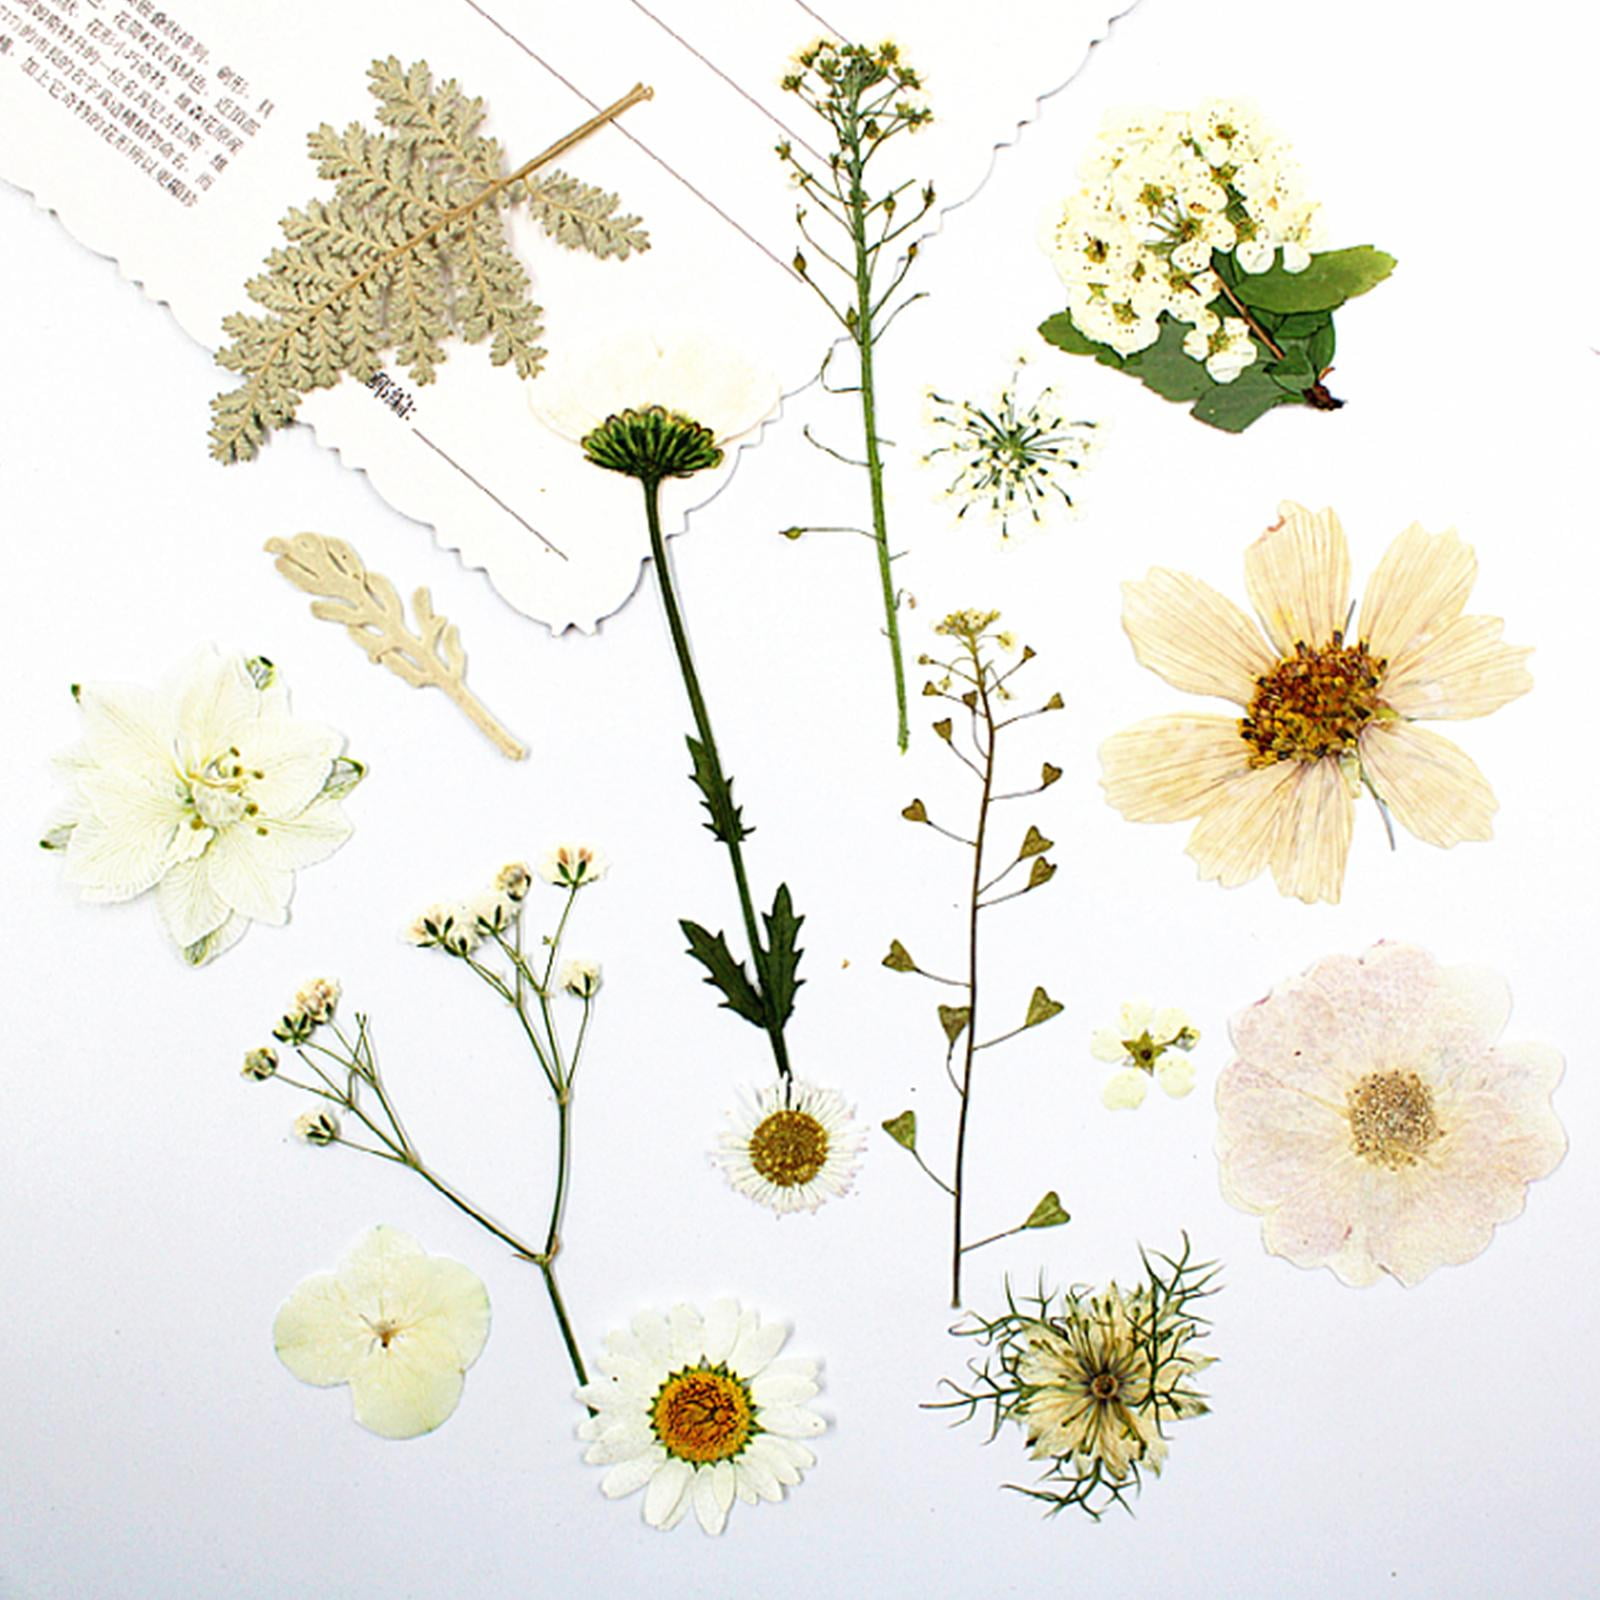 140 Pcs Dried Pressed Flowers for Resin Real Pressed Flowers Dry Leaves Bulk Natural Herbs Kit for Scrapbooking DIY Art Crafts Epoxy Resin Jewelry